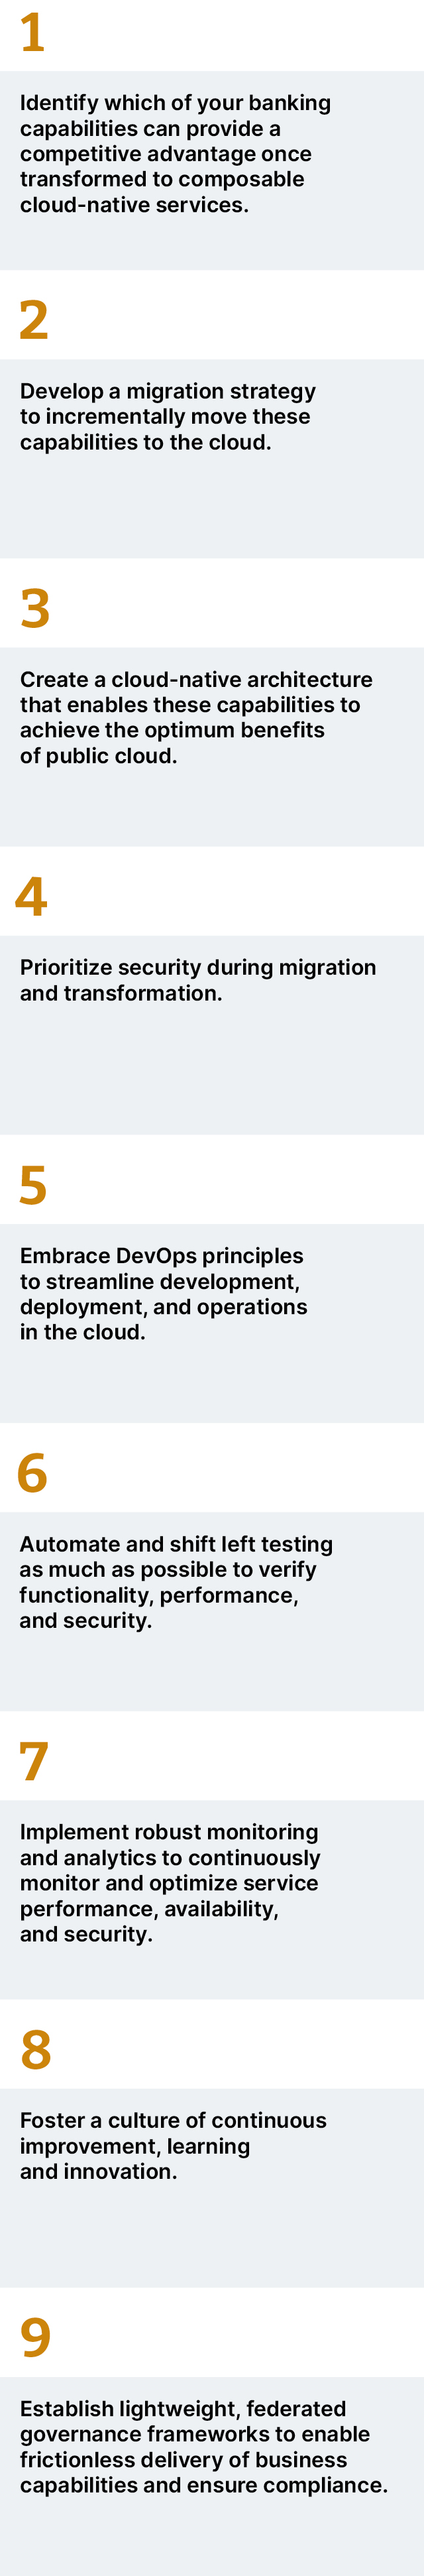 The key practices ensuring success in cloud-native transformation. These include focusing on business differentiation and incremental delivery of cloud-native technology with business value prioritization. Automation in delivery and quality assurance with the necessary operational tools enable delivering with speed and stability. Finally, no transformation can succeed without a generative culture of continuous improvement and federated guidance and governance.